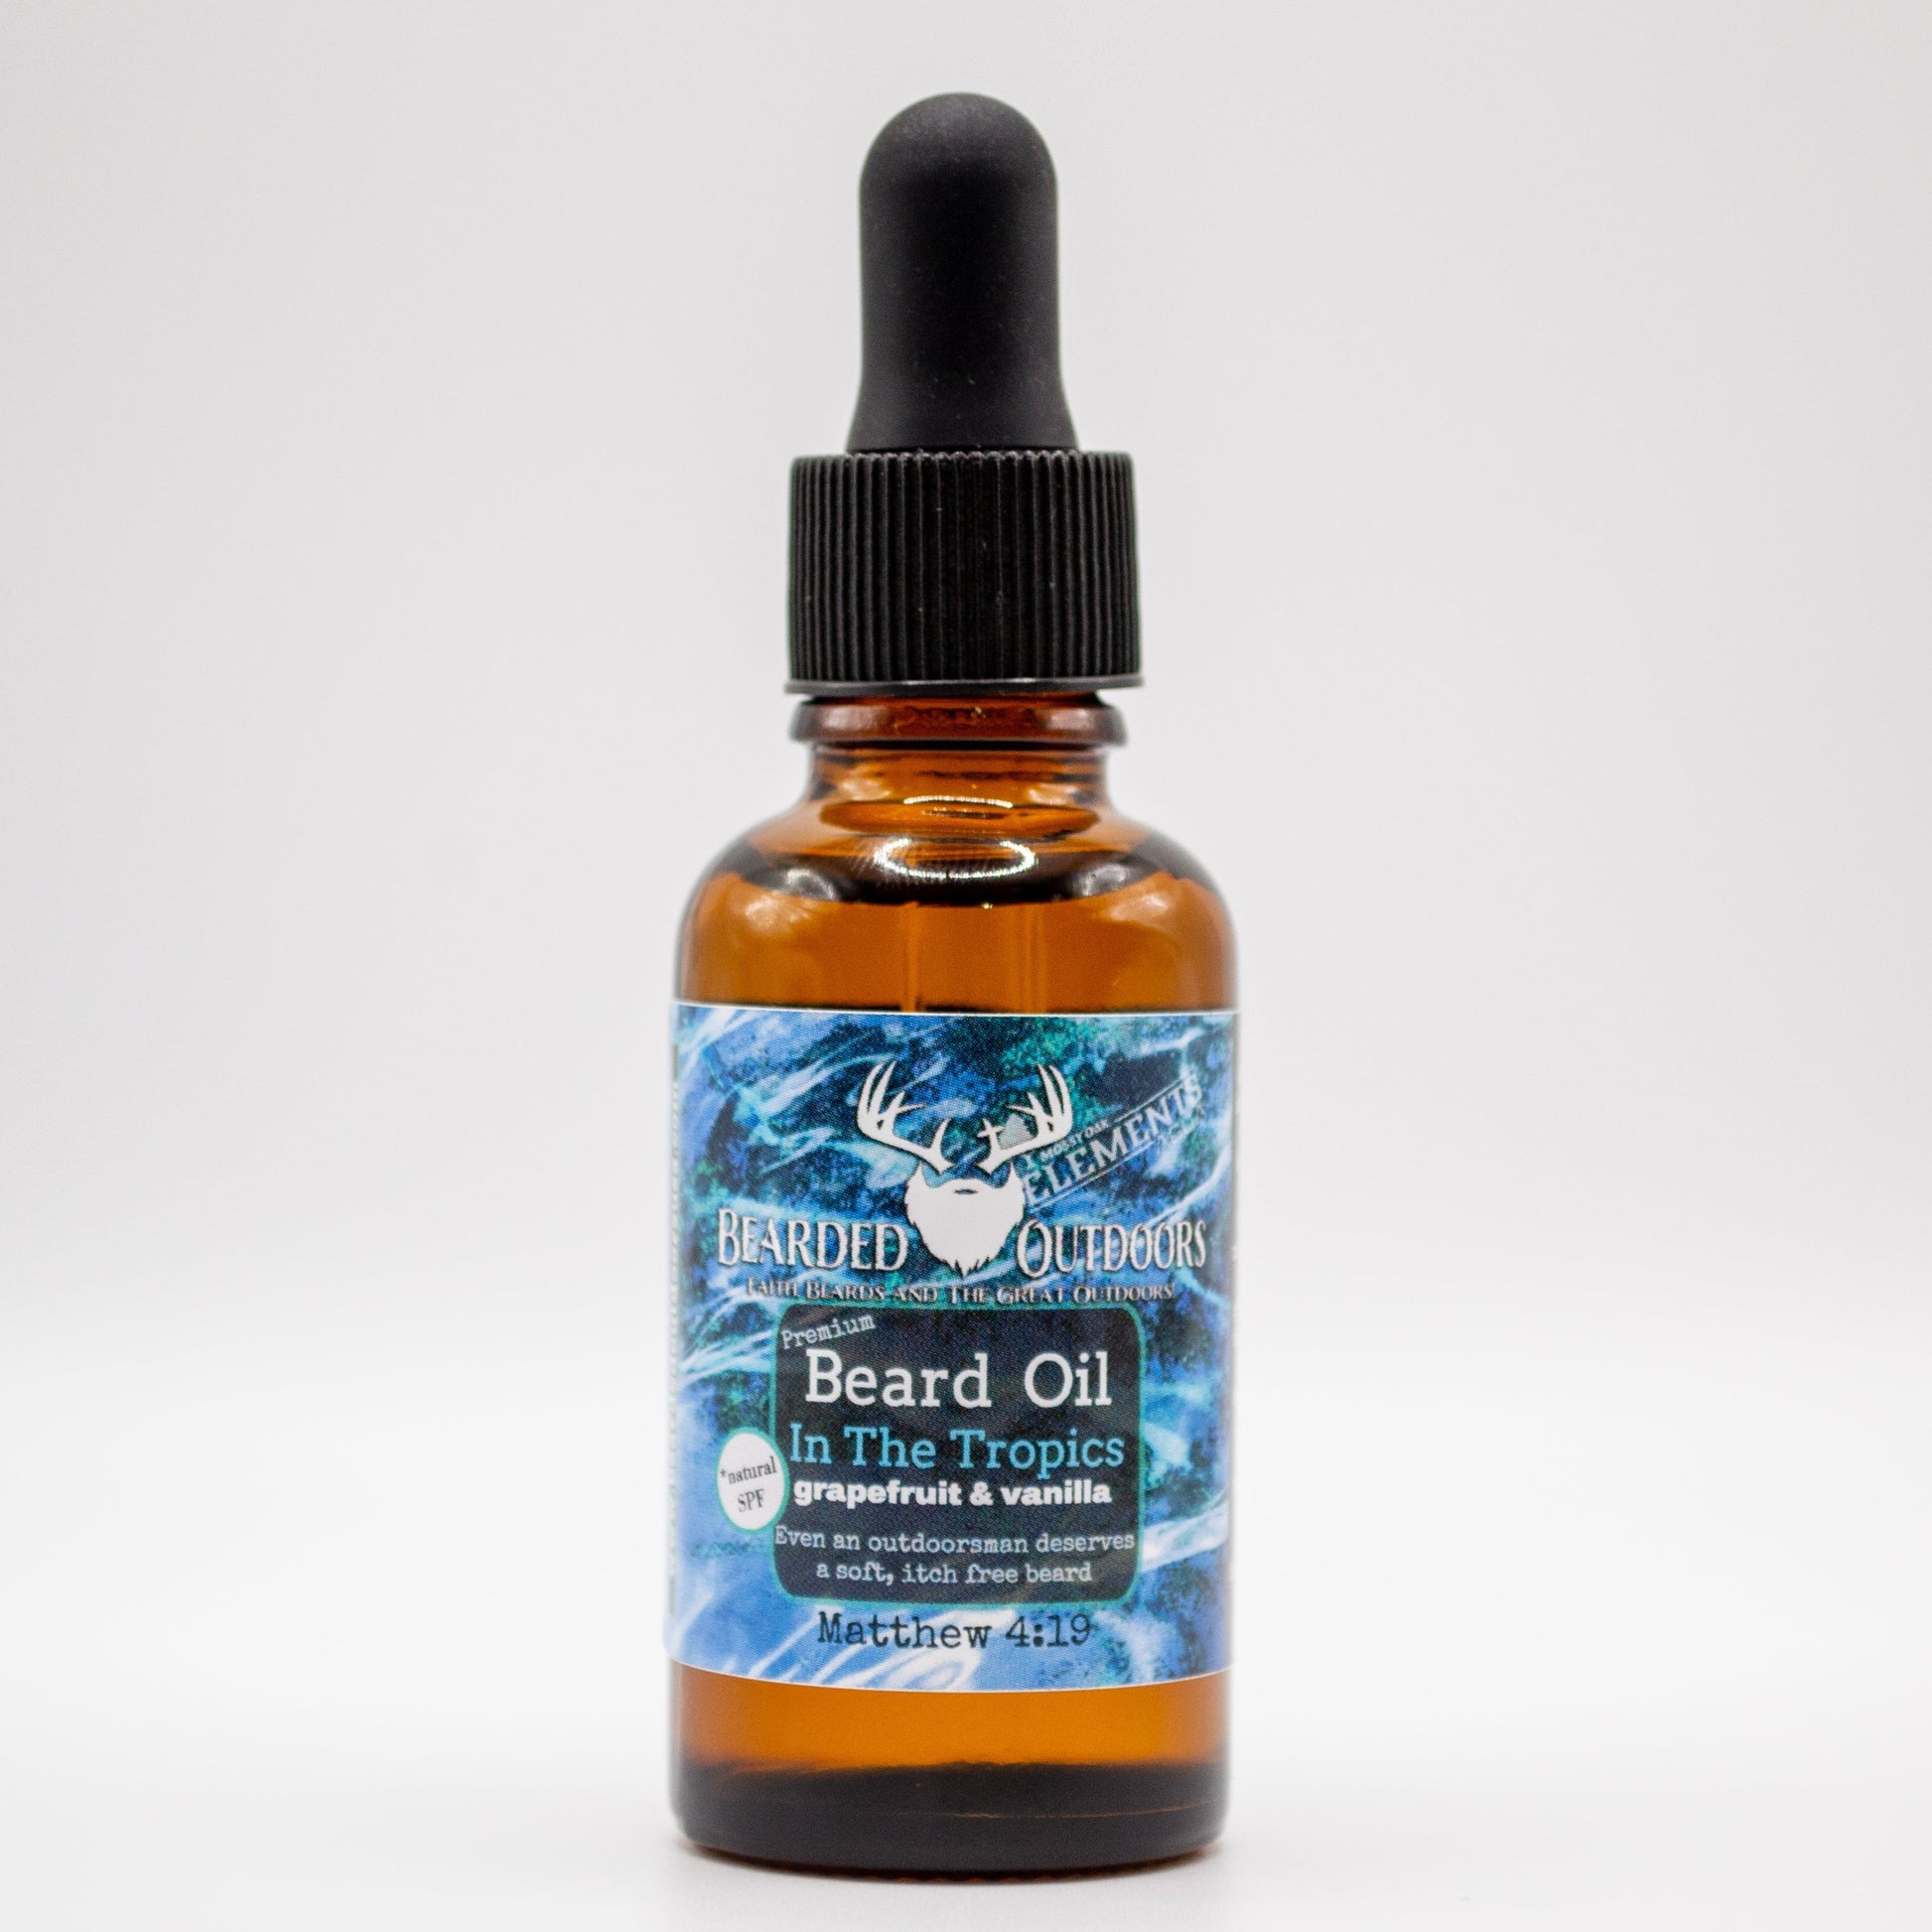 Mossy Oak In The Tropics (grapefruit and vanilla) Premium Beard Oil wrapped in Elements Camo with natural SPF by Bearded Outdoors